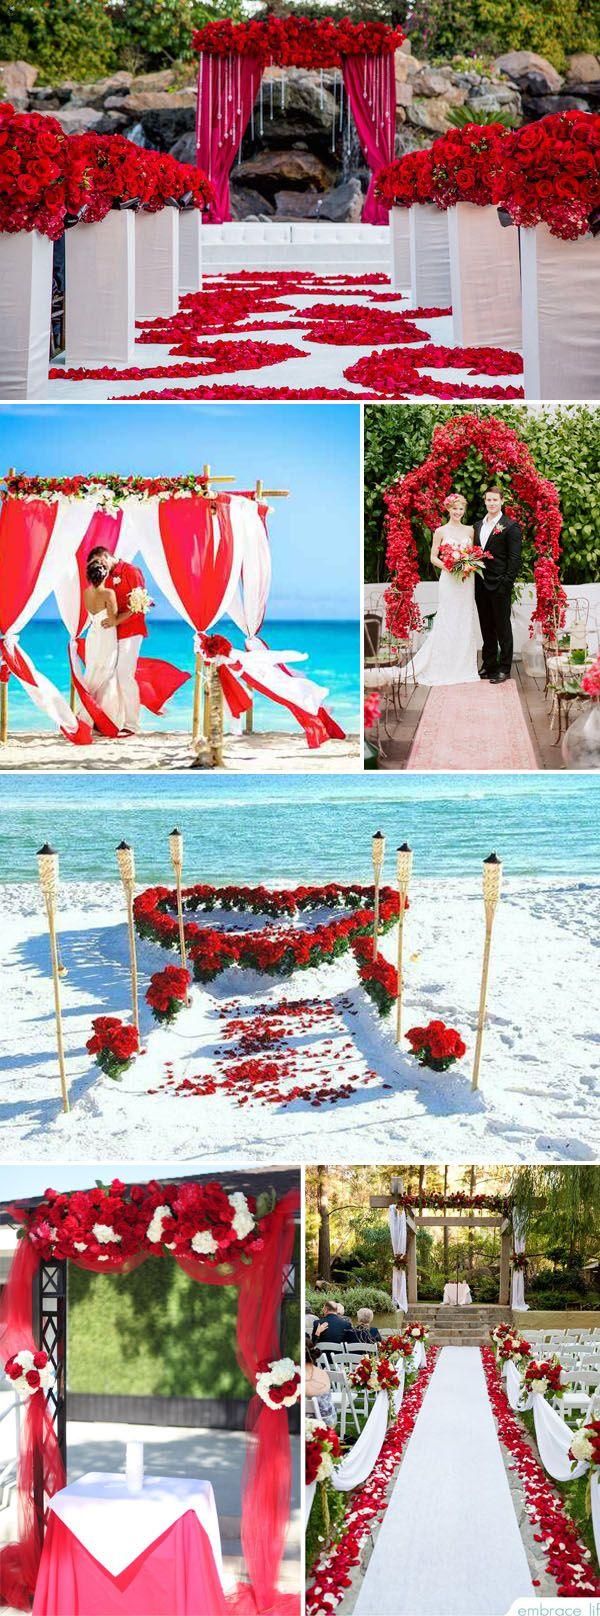 Wedding - 40 Inspirational Classic Red And White Wedding Ideas